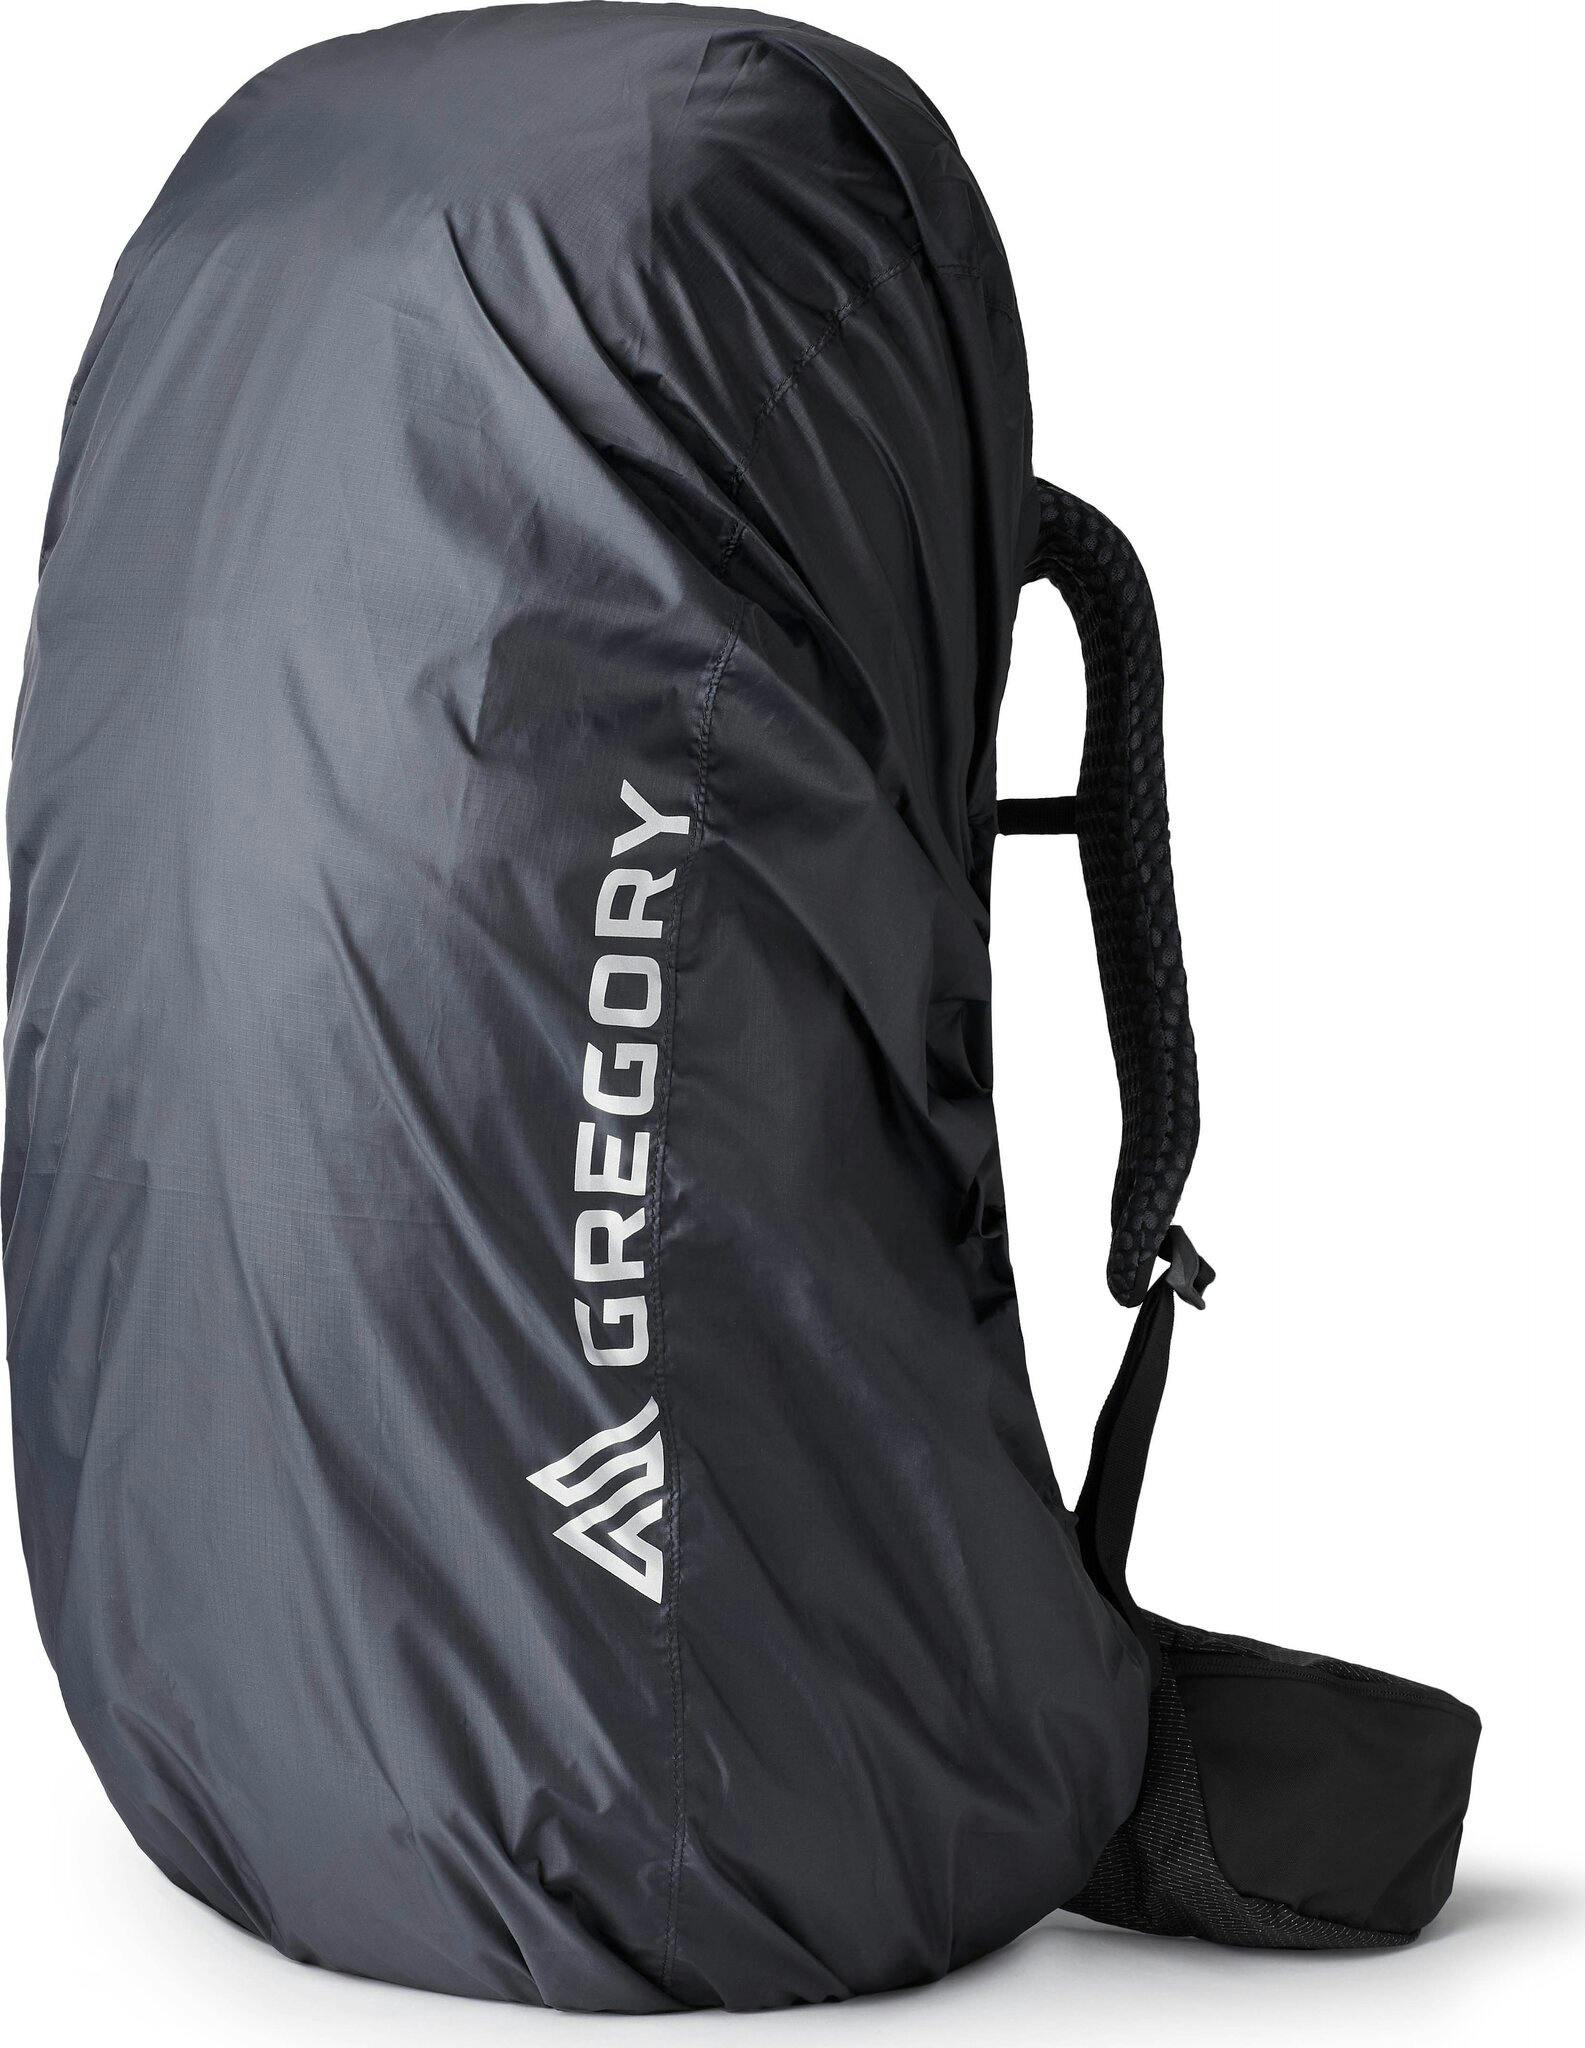 Product image for Raincover 50L-80L